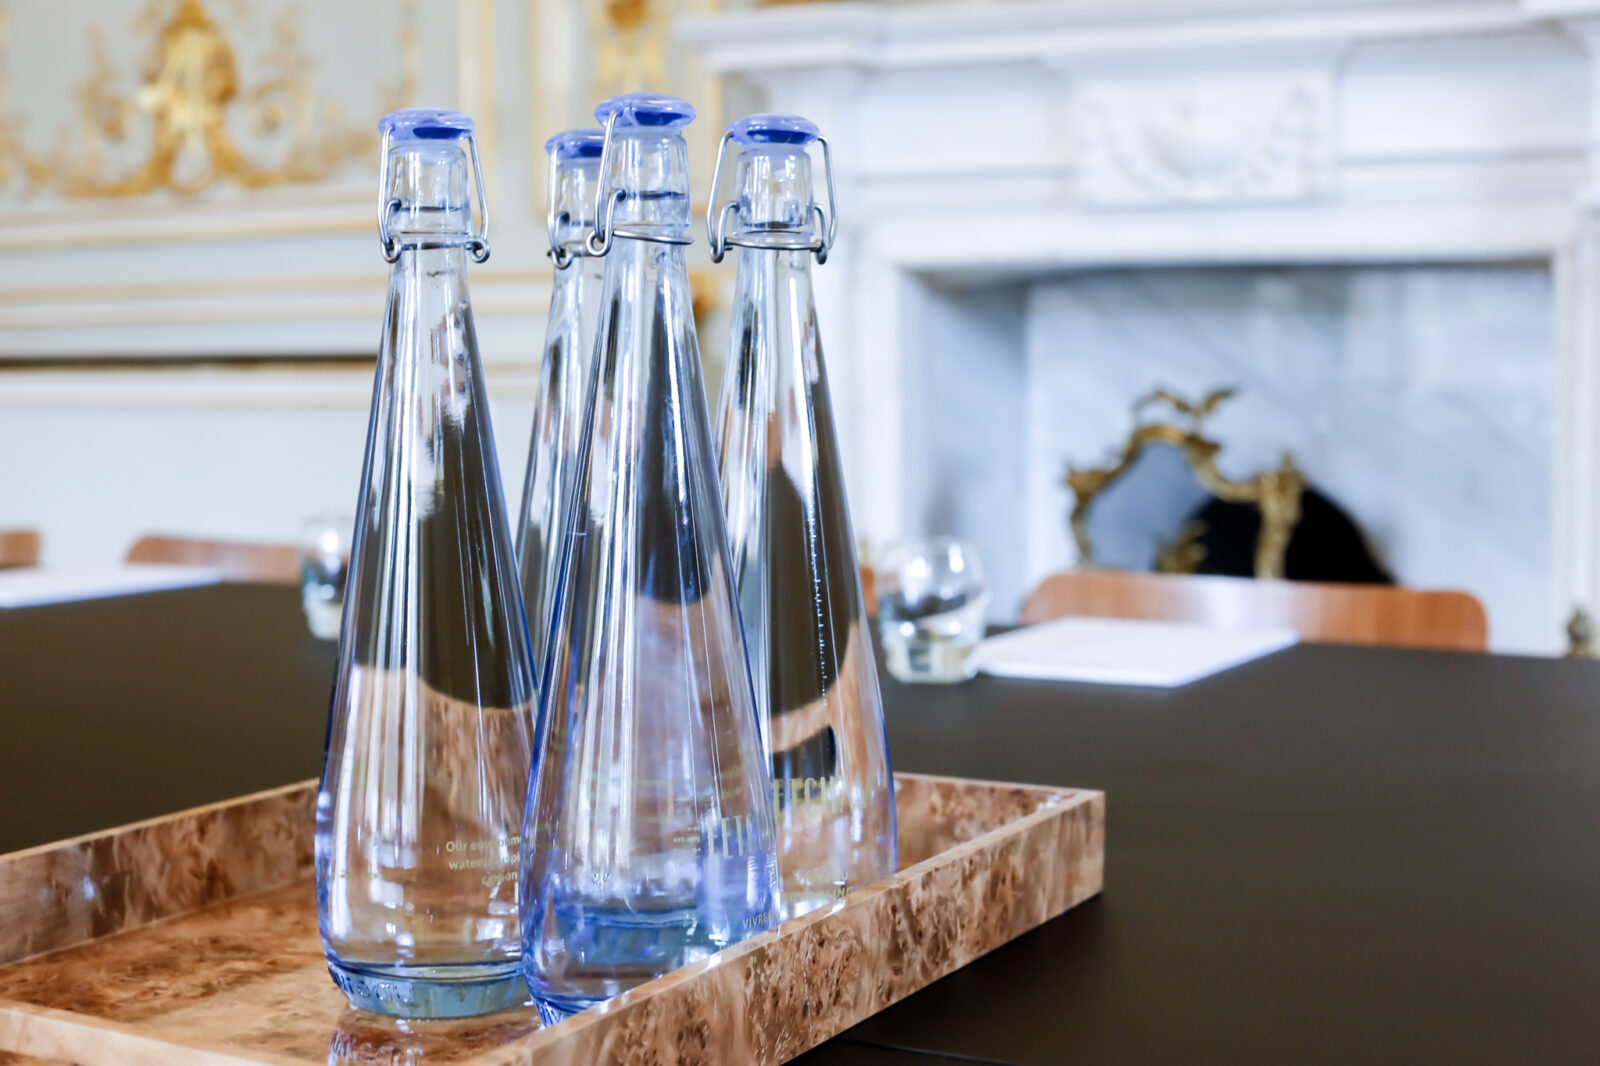 Meeting Space in Surrey - fresh, filtered water is available 